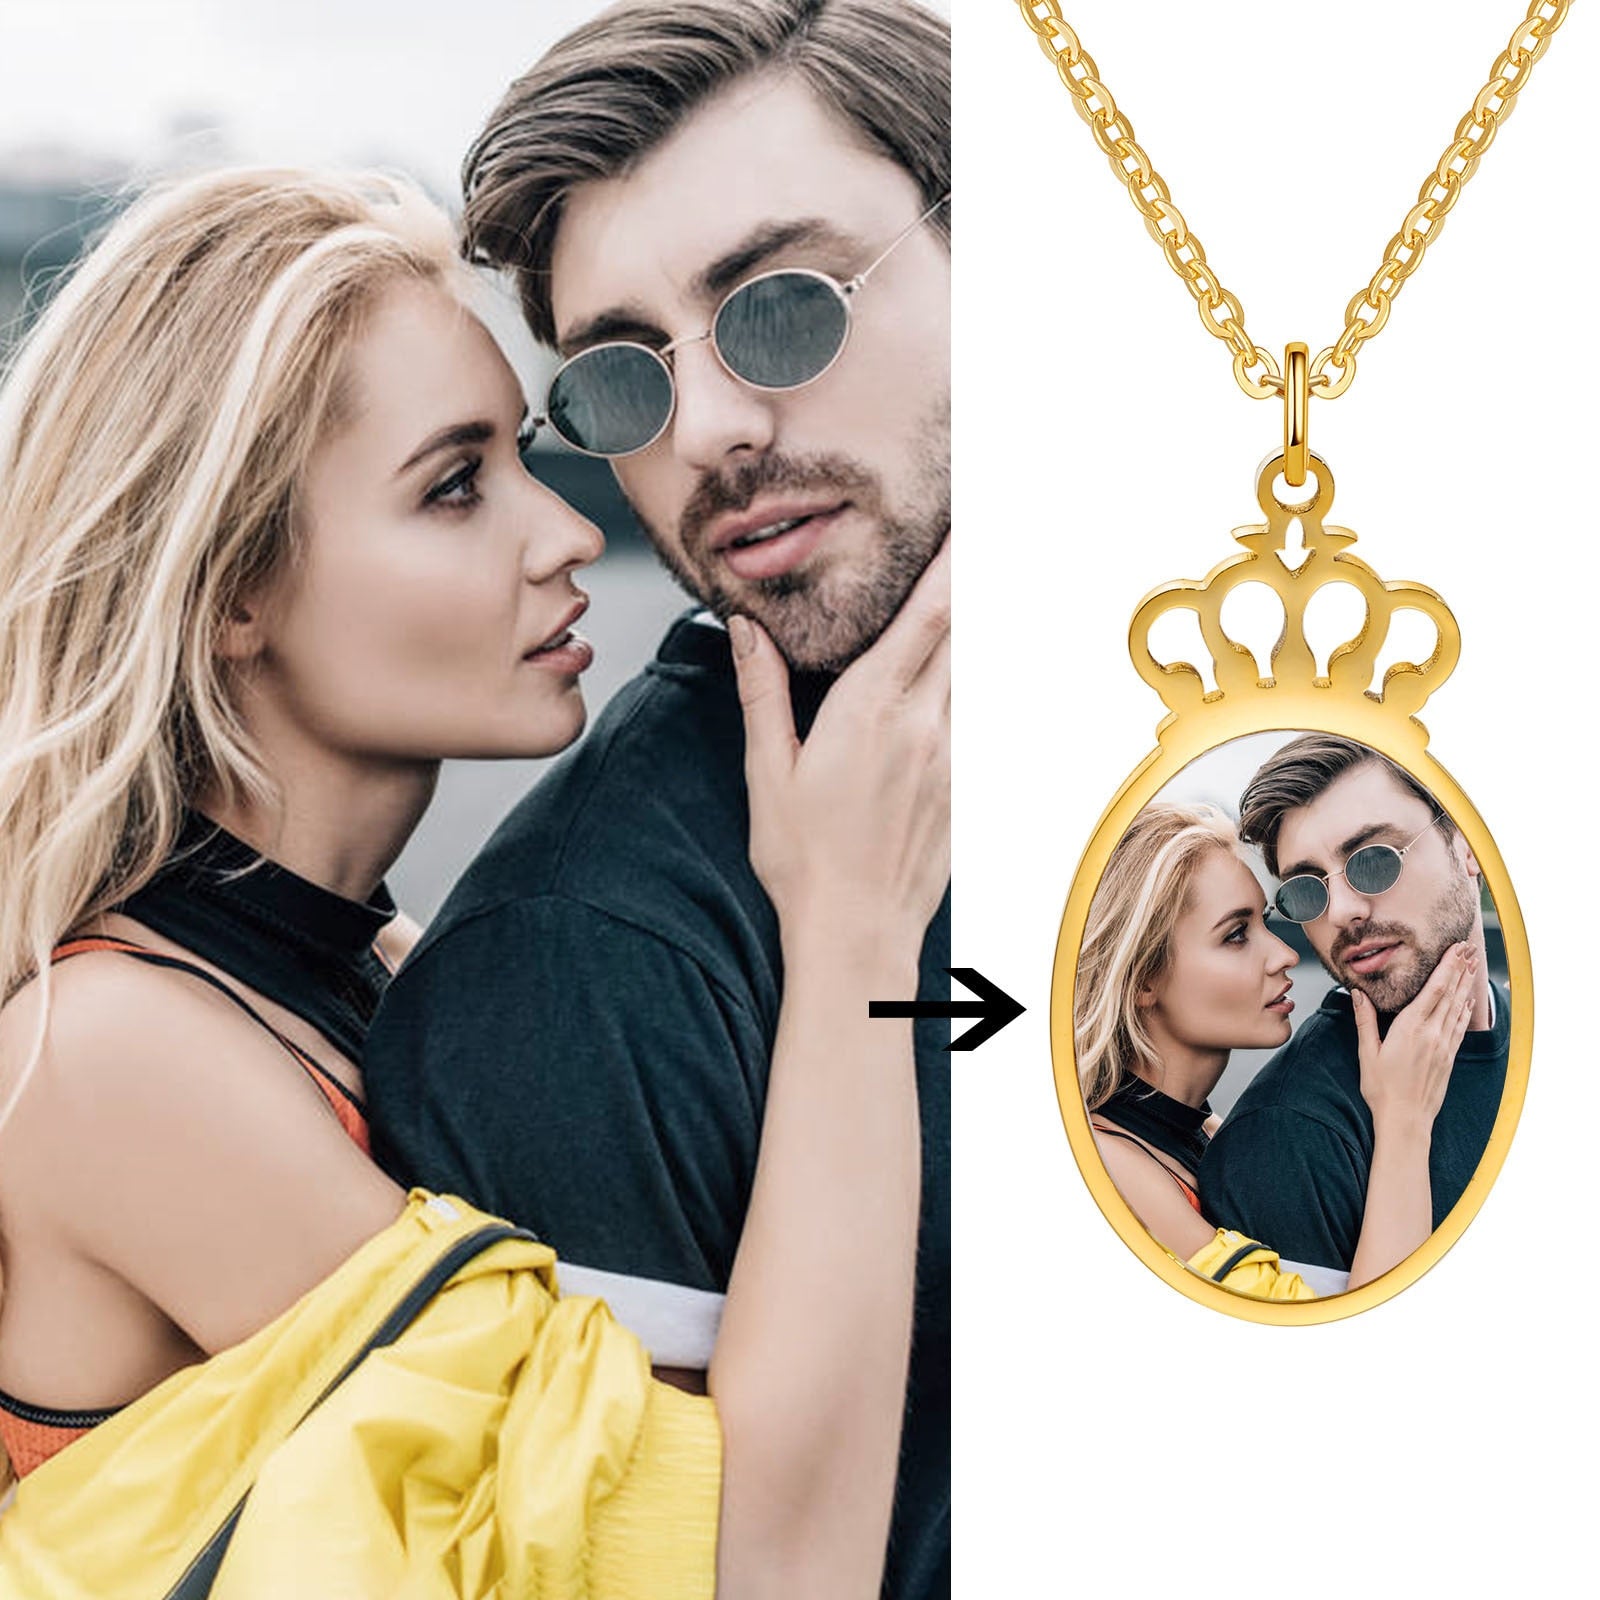 Vnox Free Personalize Photo Crown Necklaces for Women,Custom Picture Image Words Info, Stainless Steel Pendant Collar Gift - Charlie Dolly